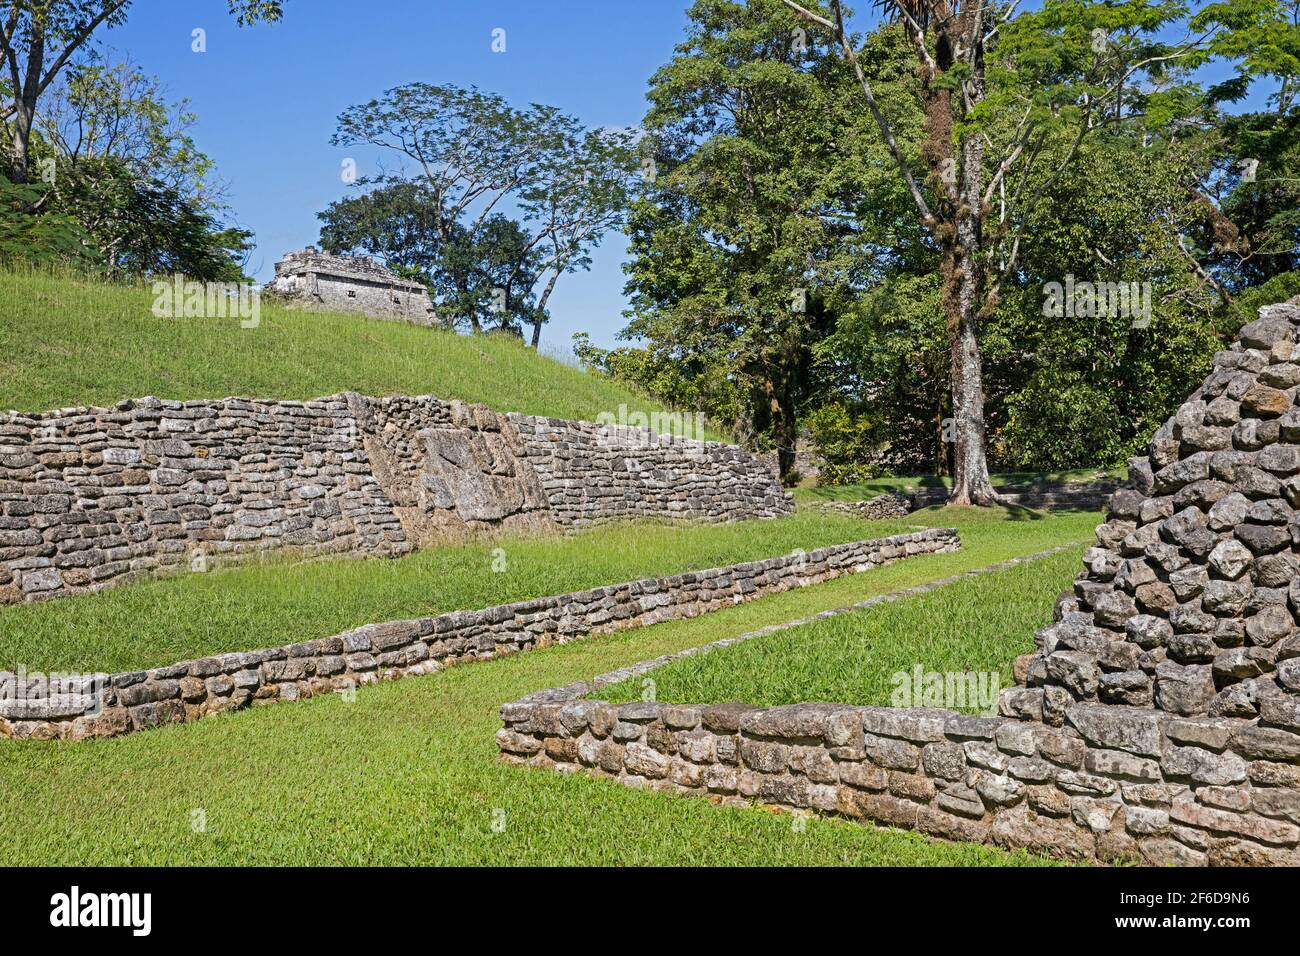 Ball Court from 500AD, one of the oldest structures at the pre-Columbian Maya civilization site of Palenque, Chiapas, Mexico Stock Photo